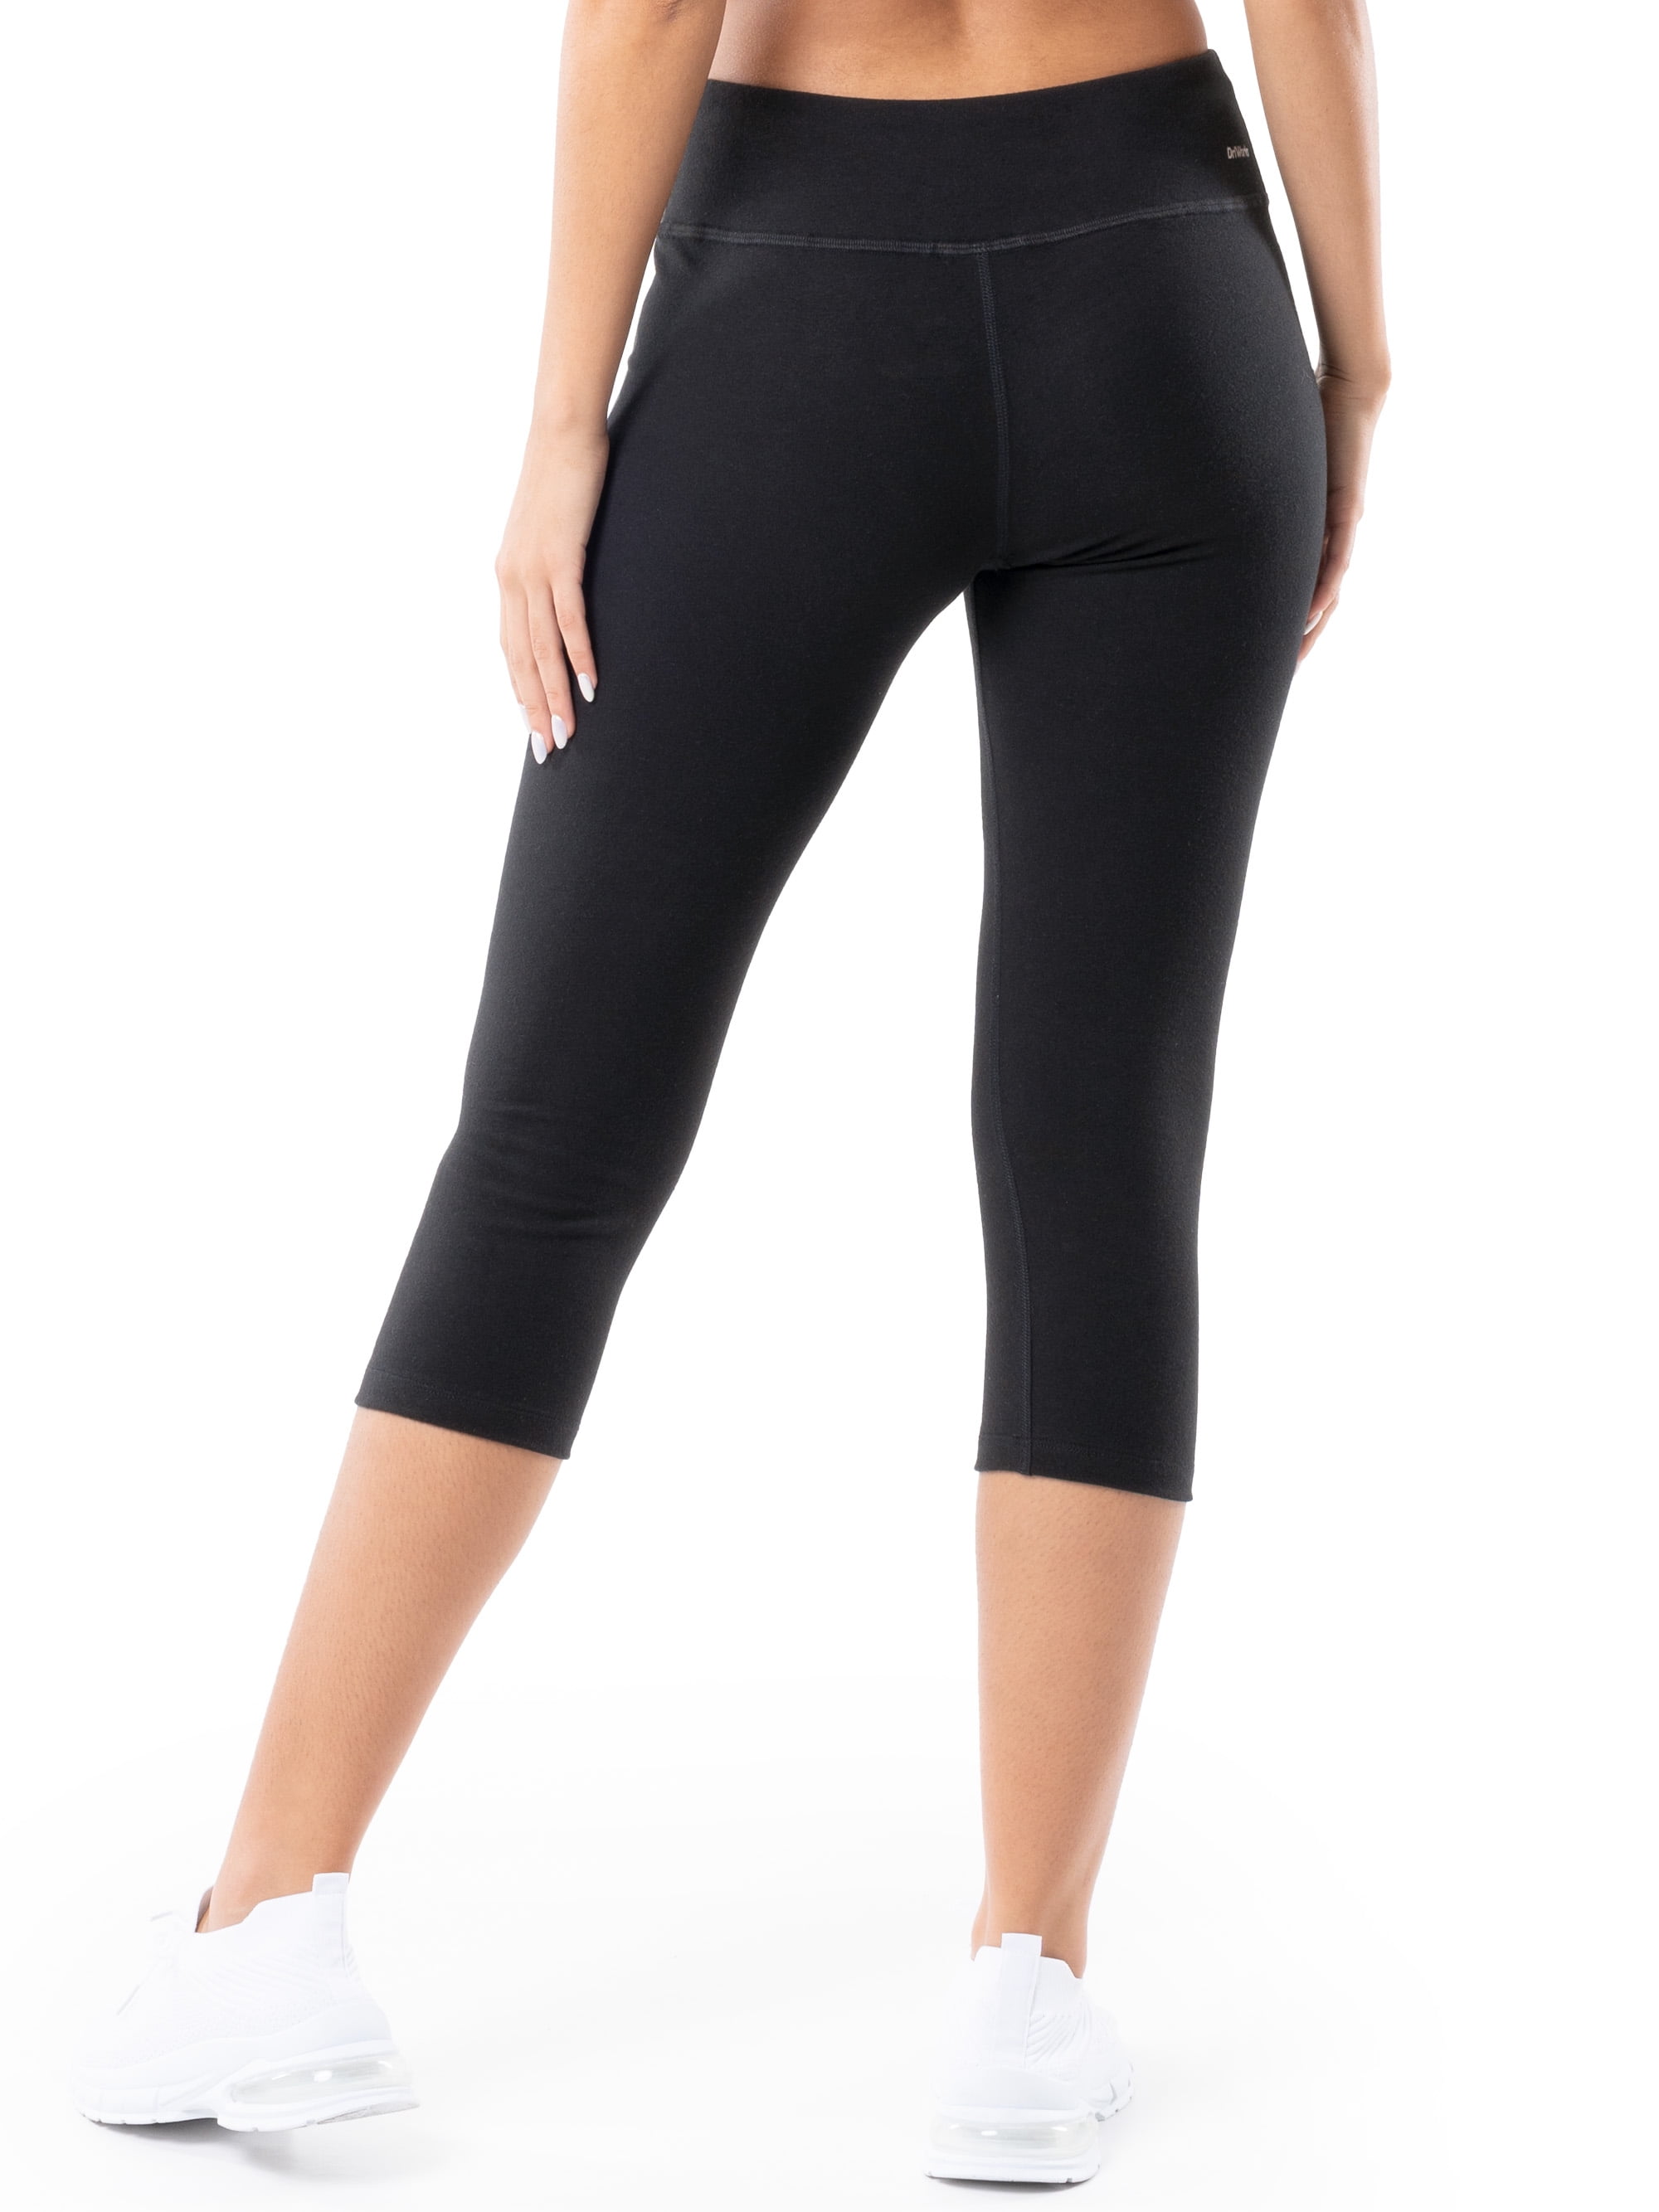 Athletic Leggings Capris By Athletic Works Size: L